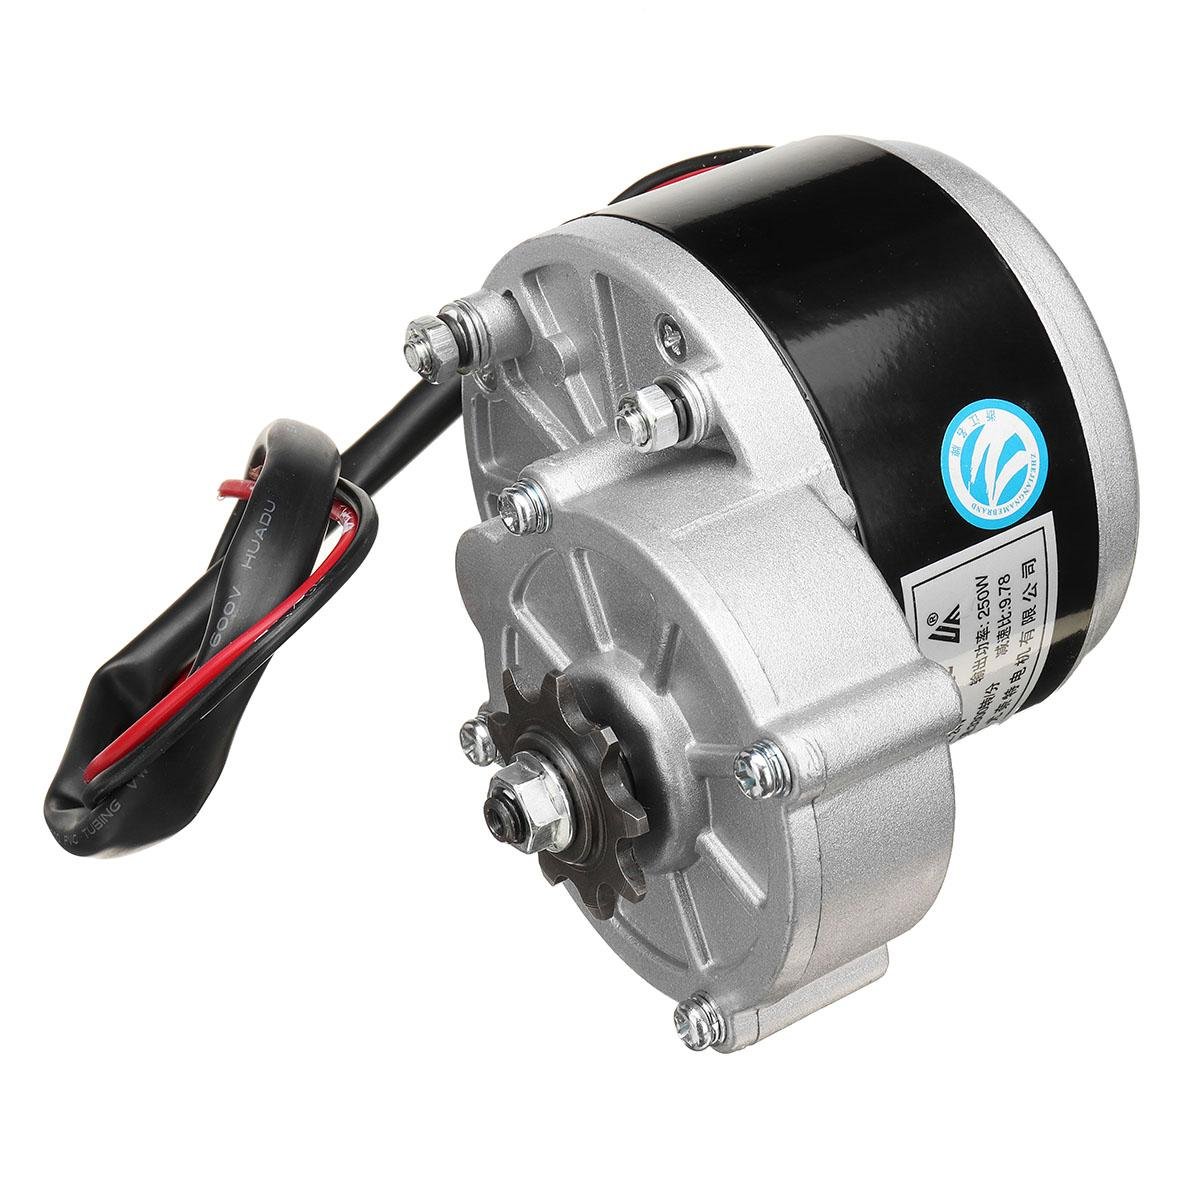 25W Single Phase E-Bicycle 24v 250w DC Geared Motor, For Conveyors